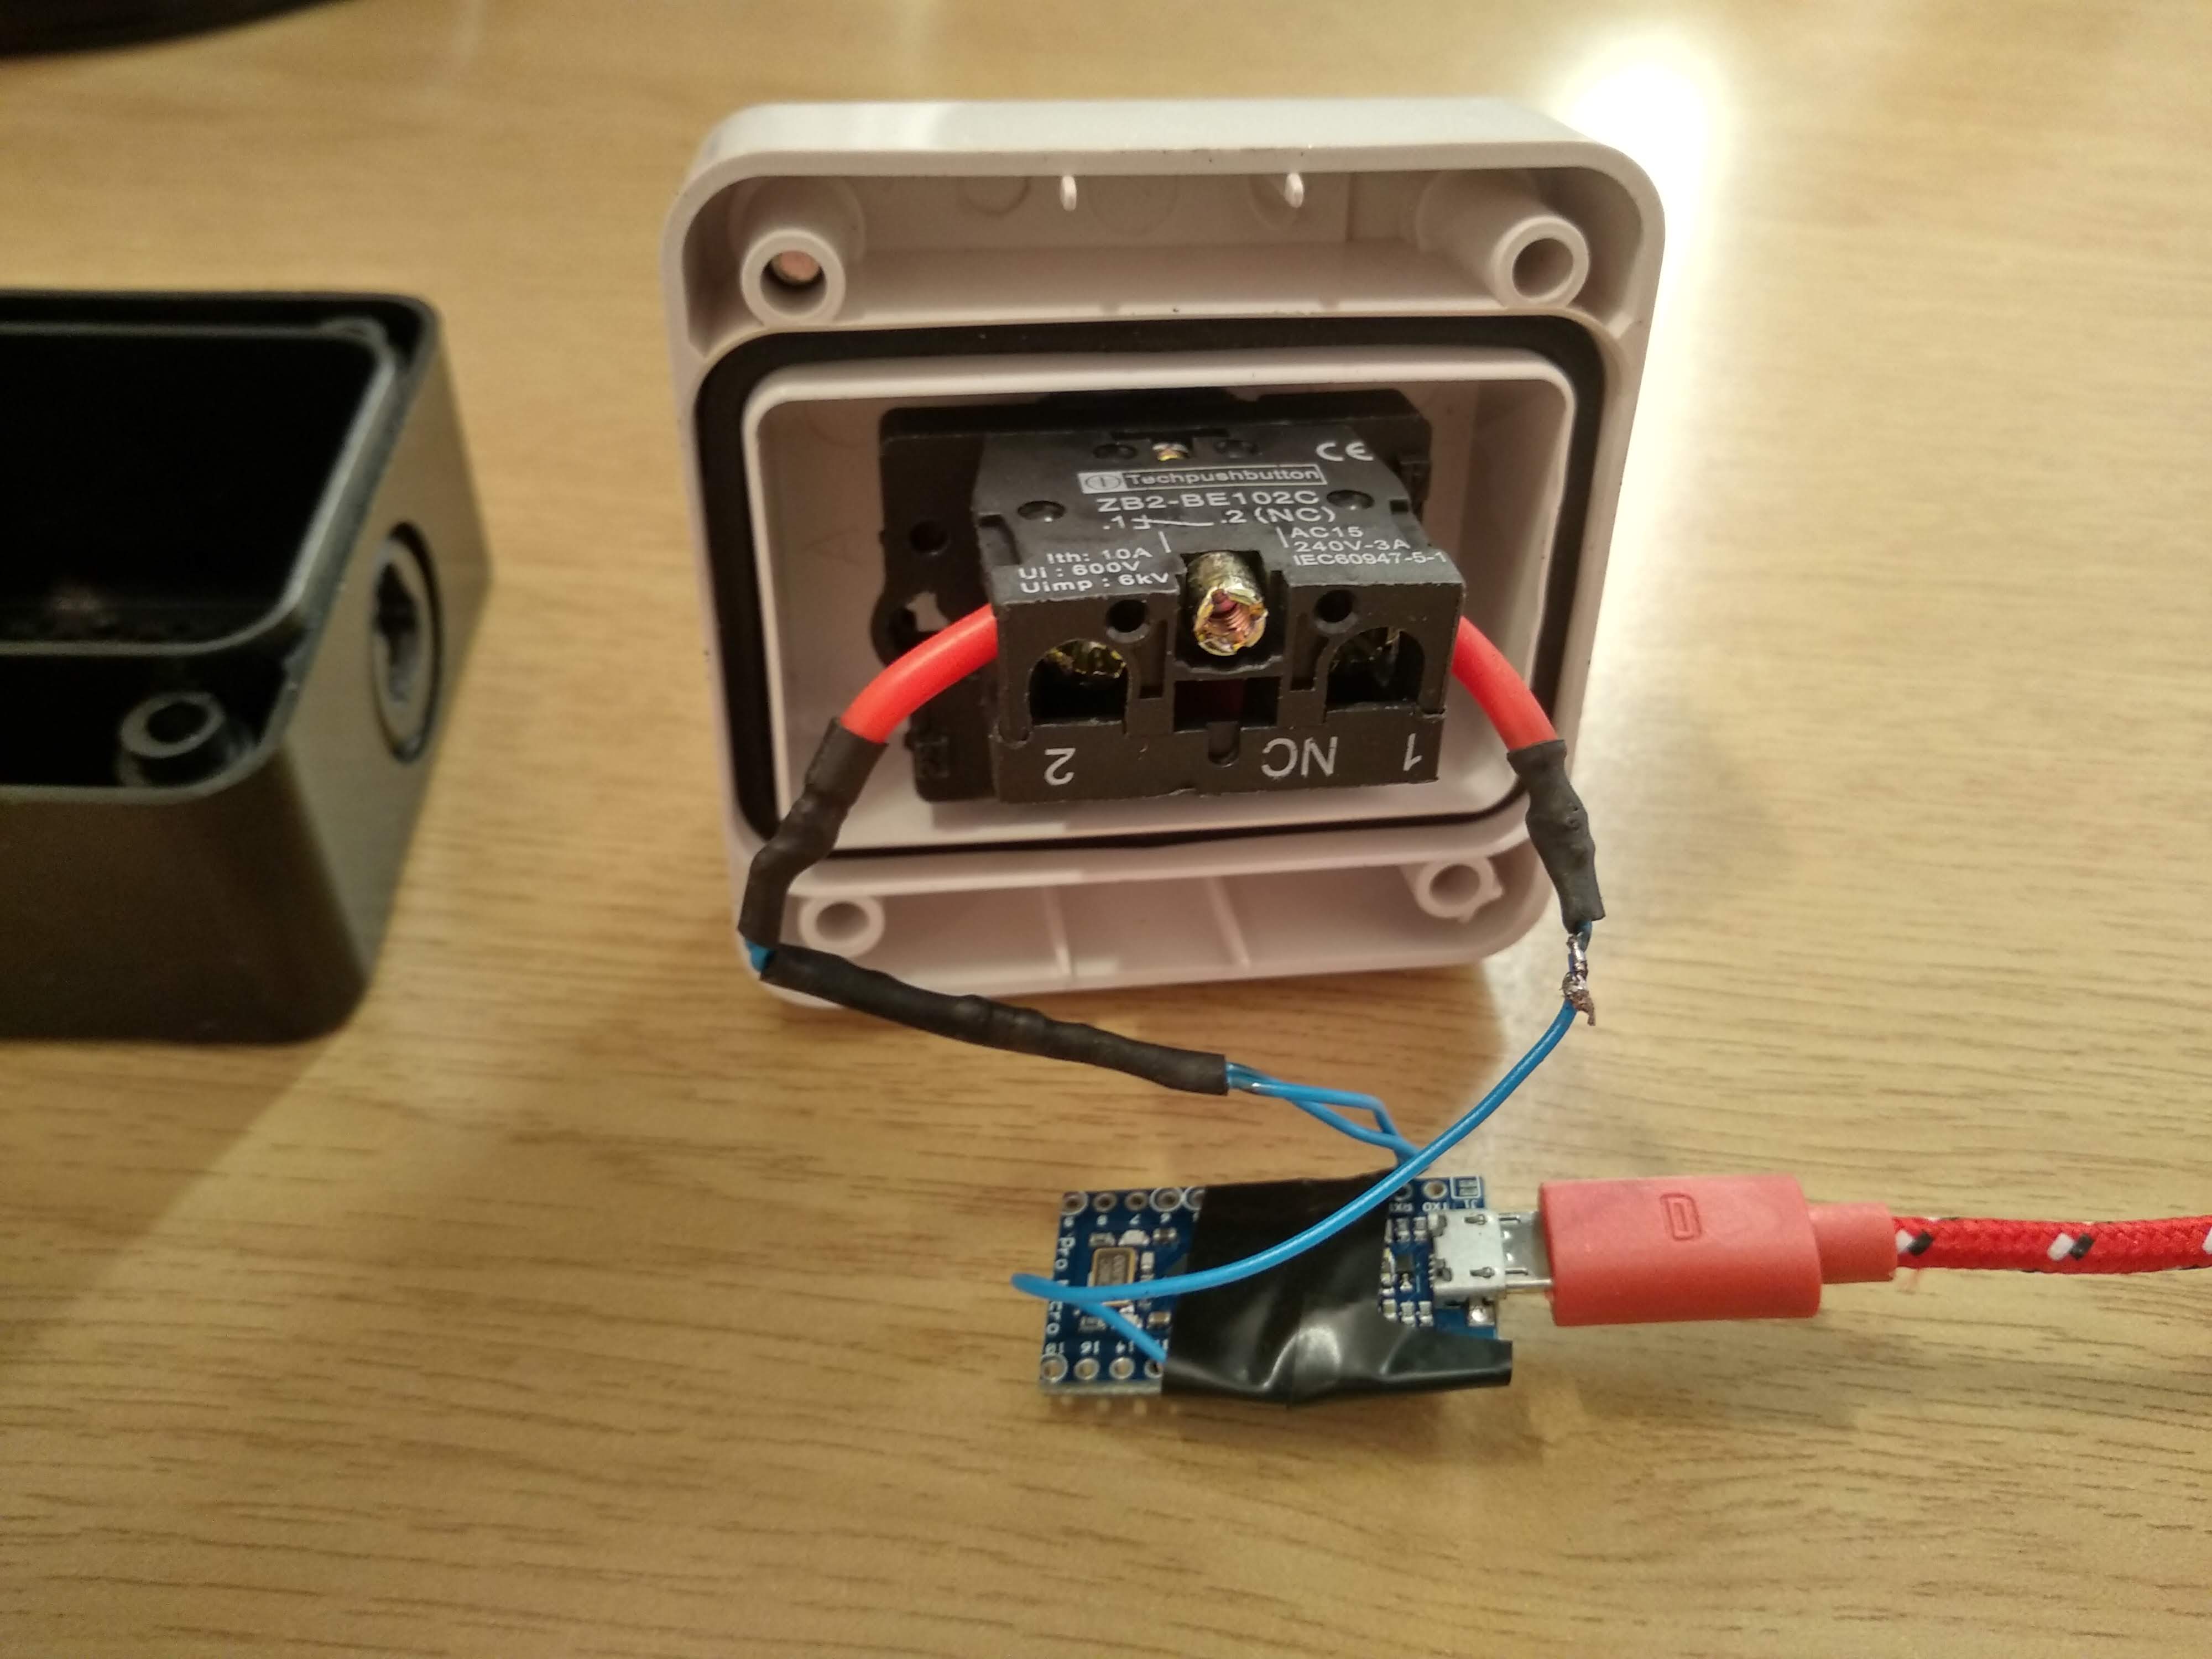 Photo of the inside of the emergency stop button with wiring and arduino visible